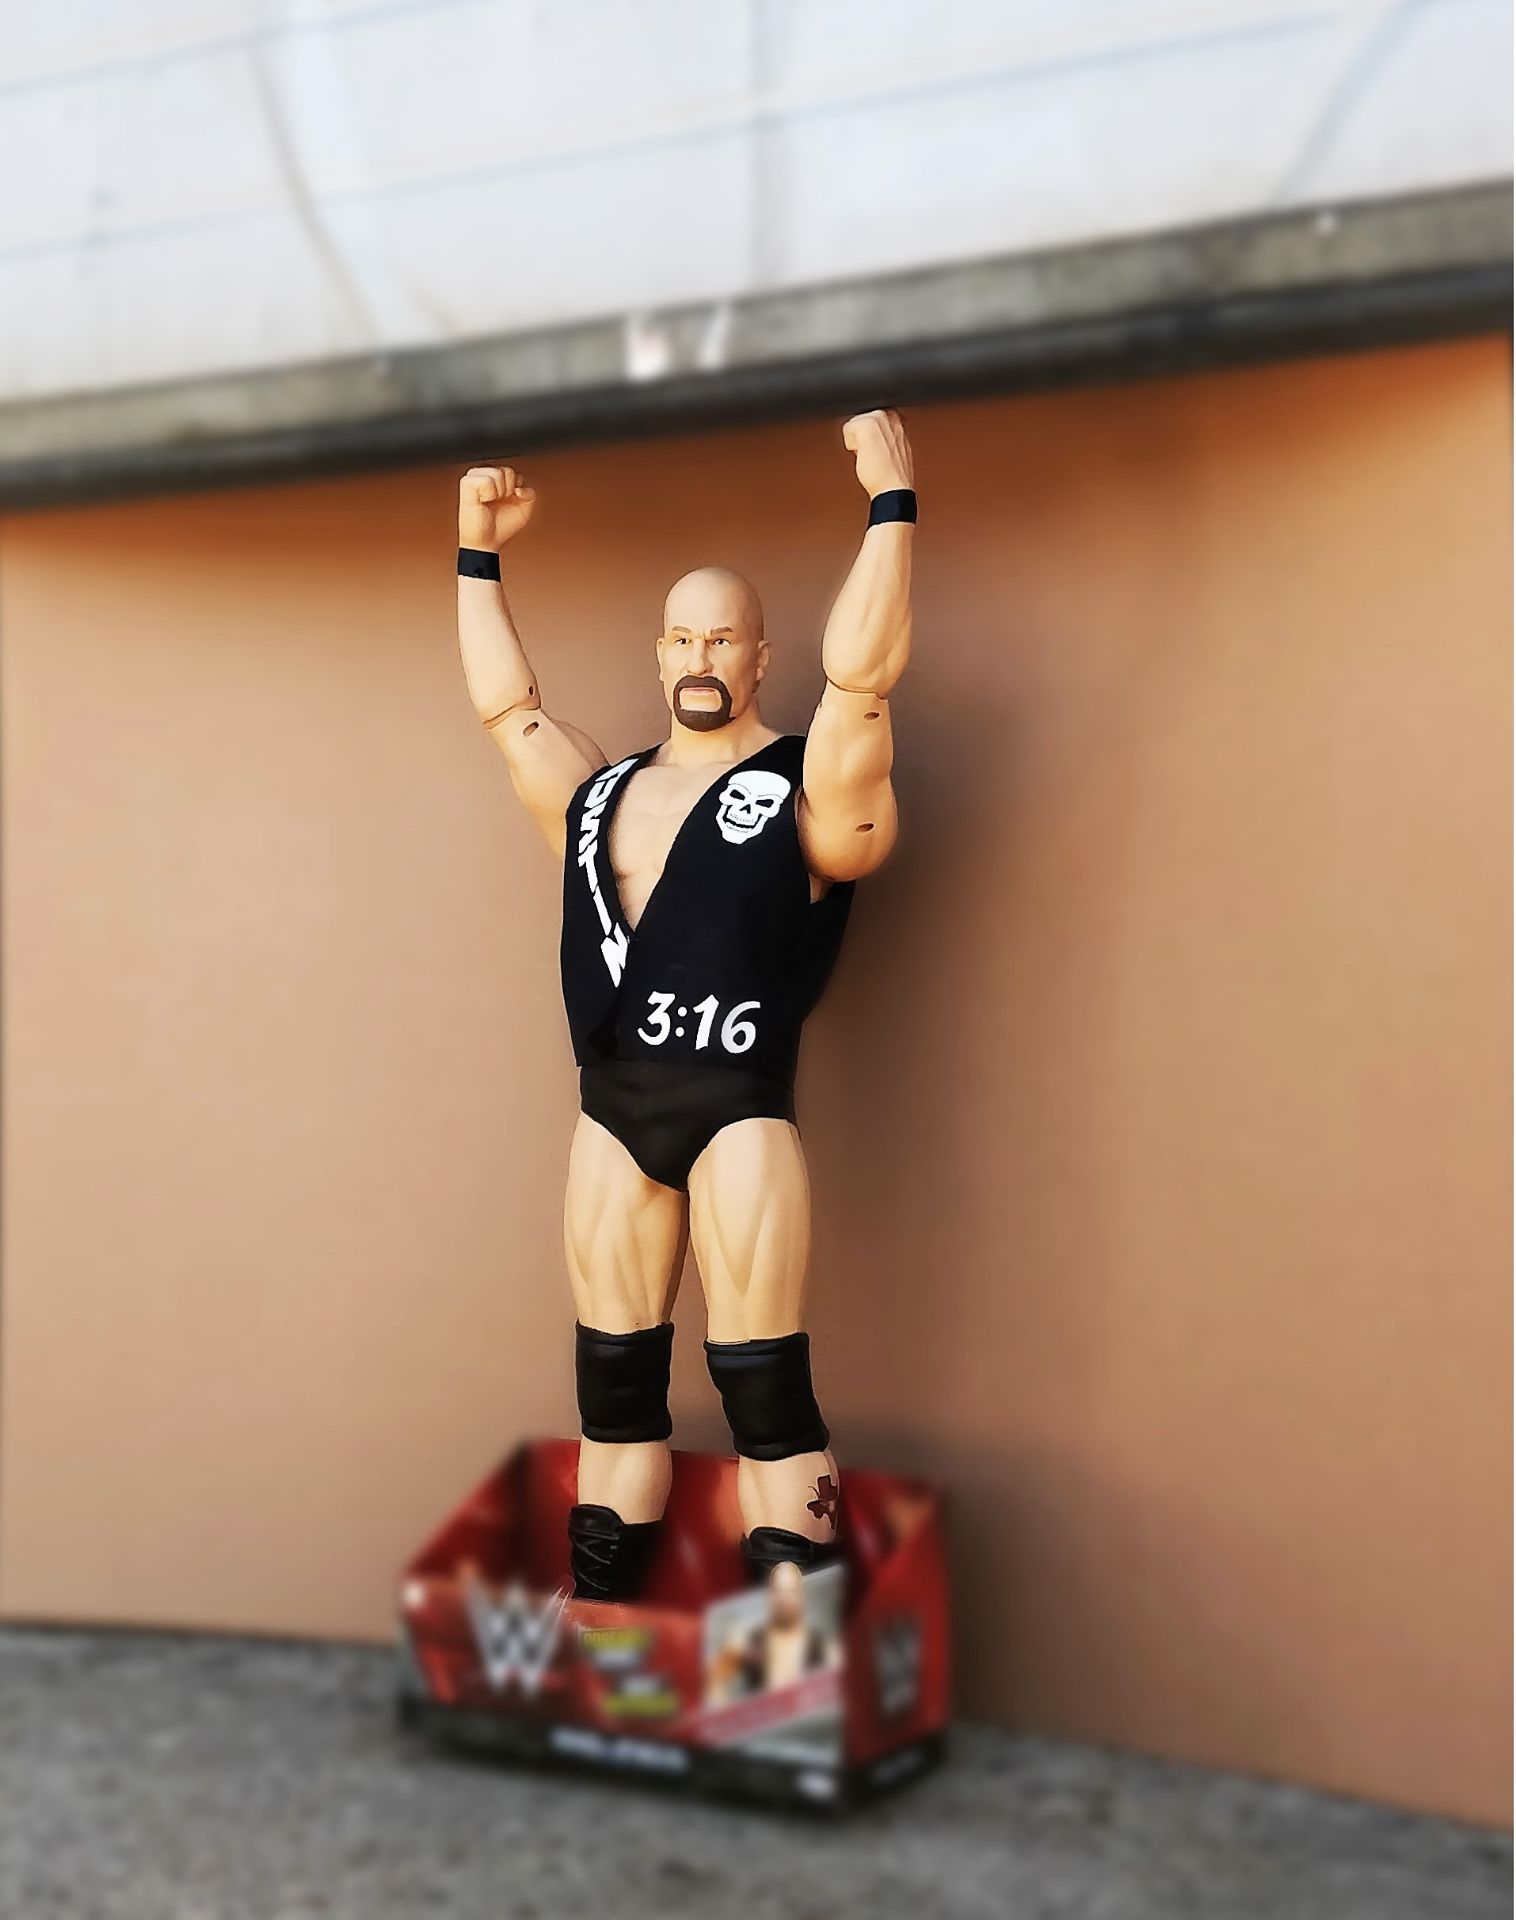 + VAT Brand New Massive 31" WWE Stone Cold Steve Austin Action Figures - 3count.co.uk Price £28. - Image 4 of 4